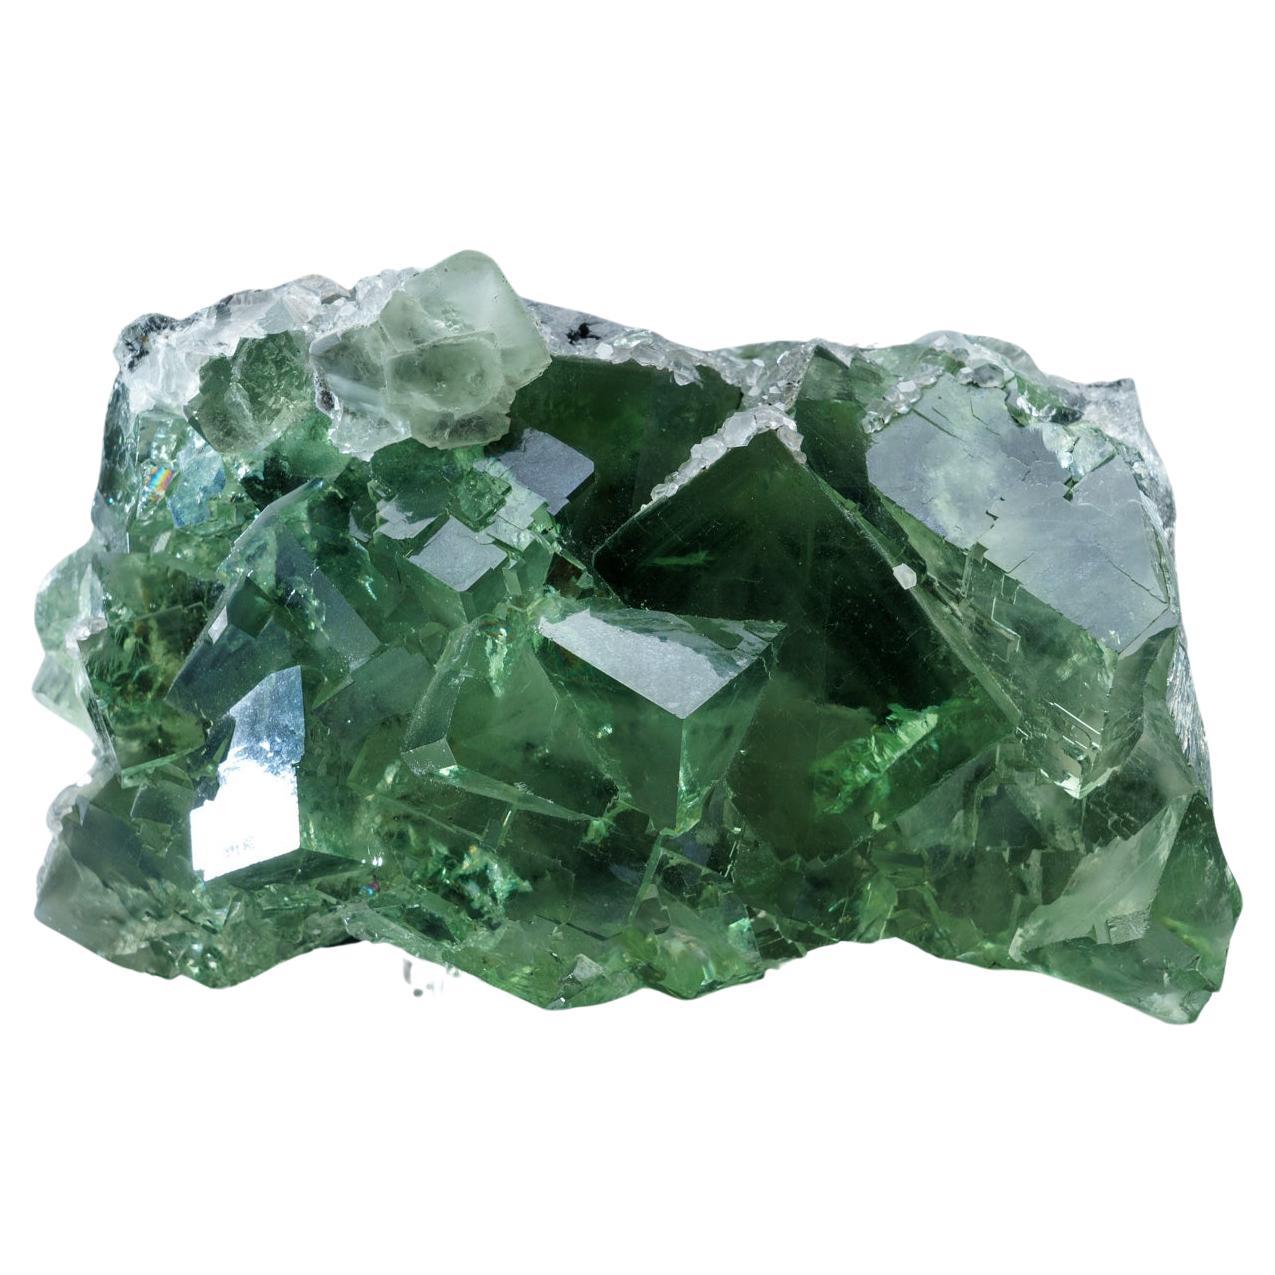 Green Fluorite and Calcite from Shanhua Pu Mine, Hunan Province, China For Sale